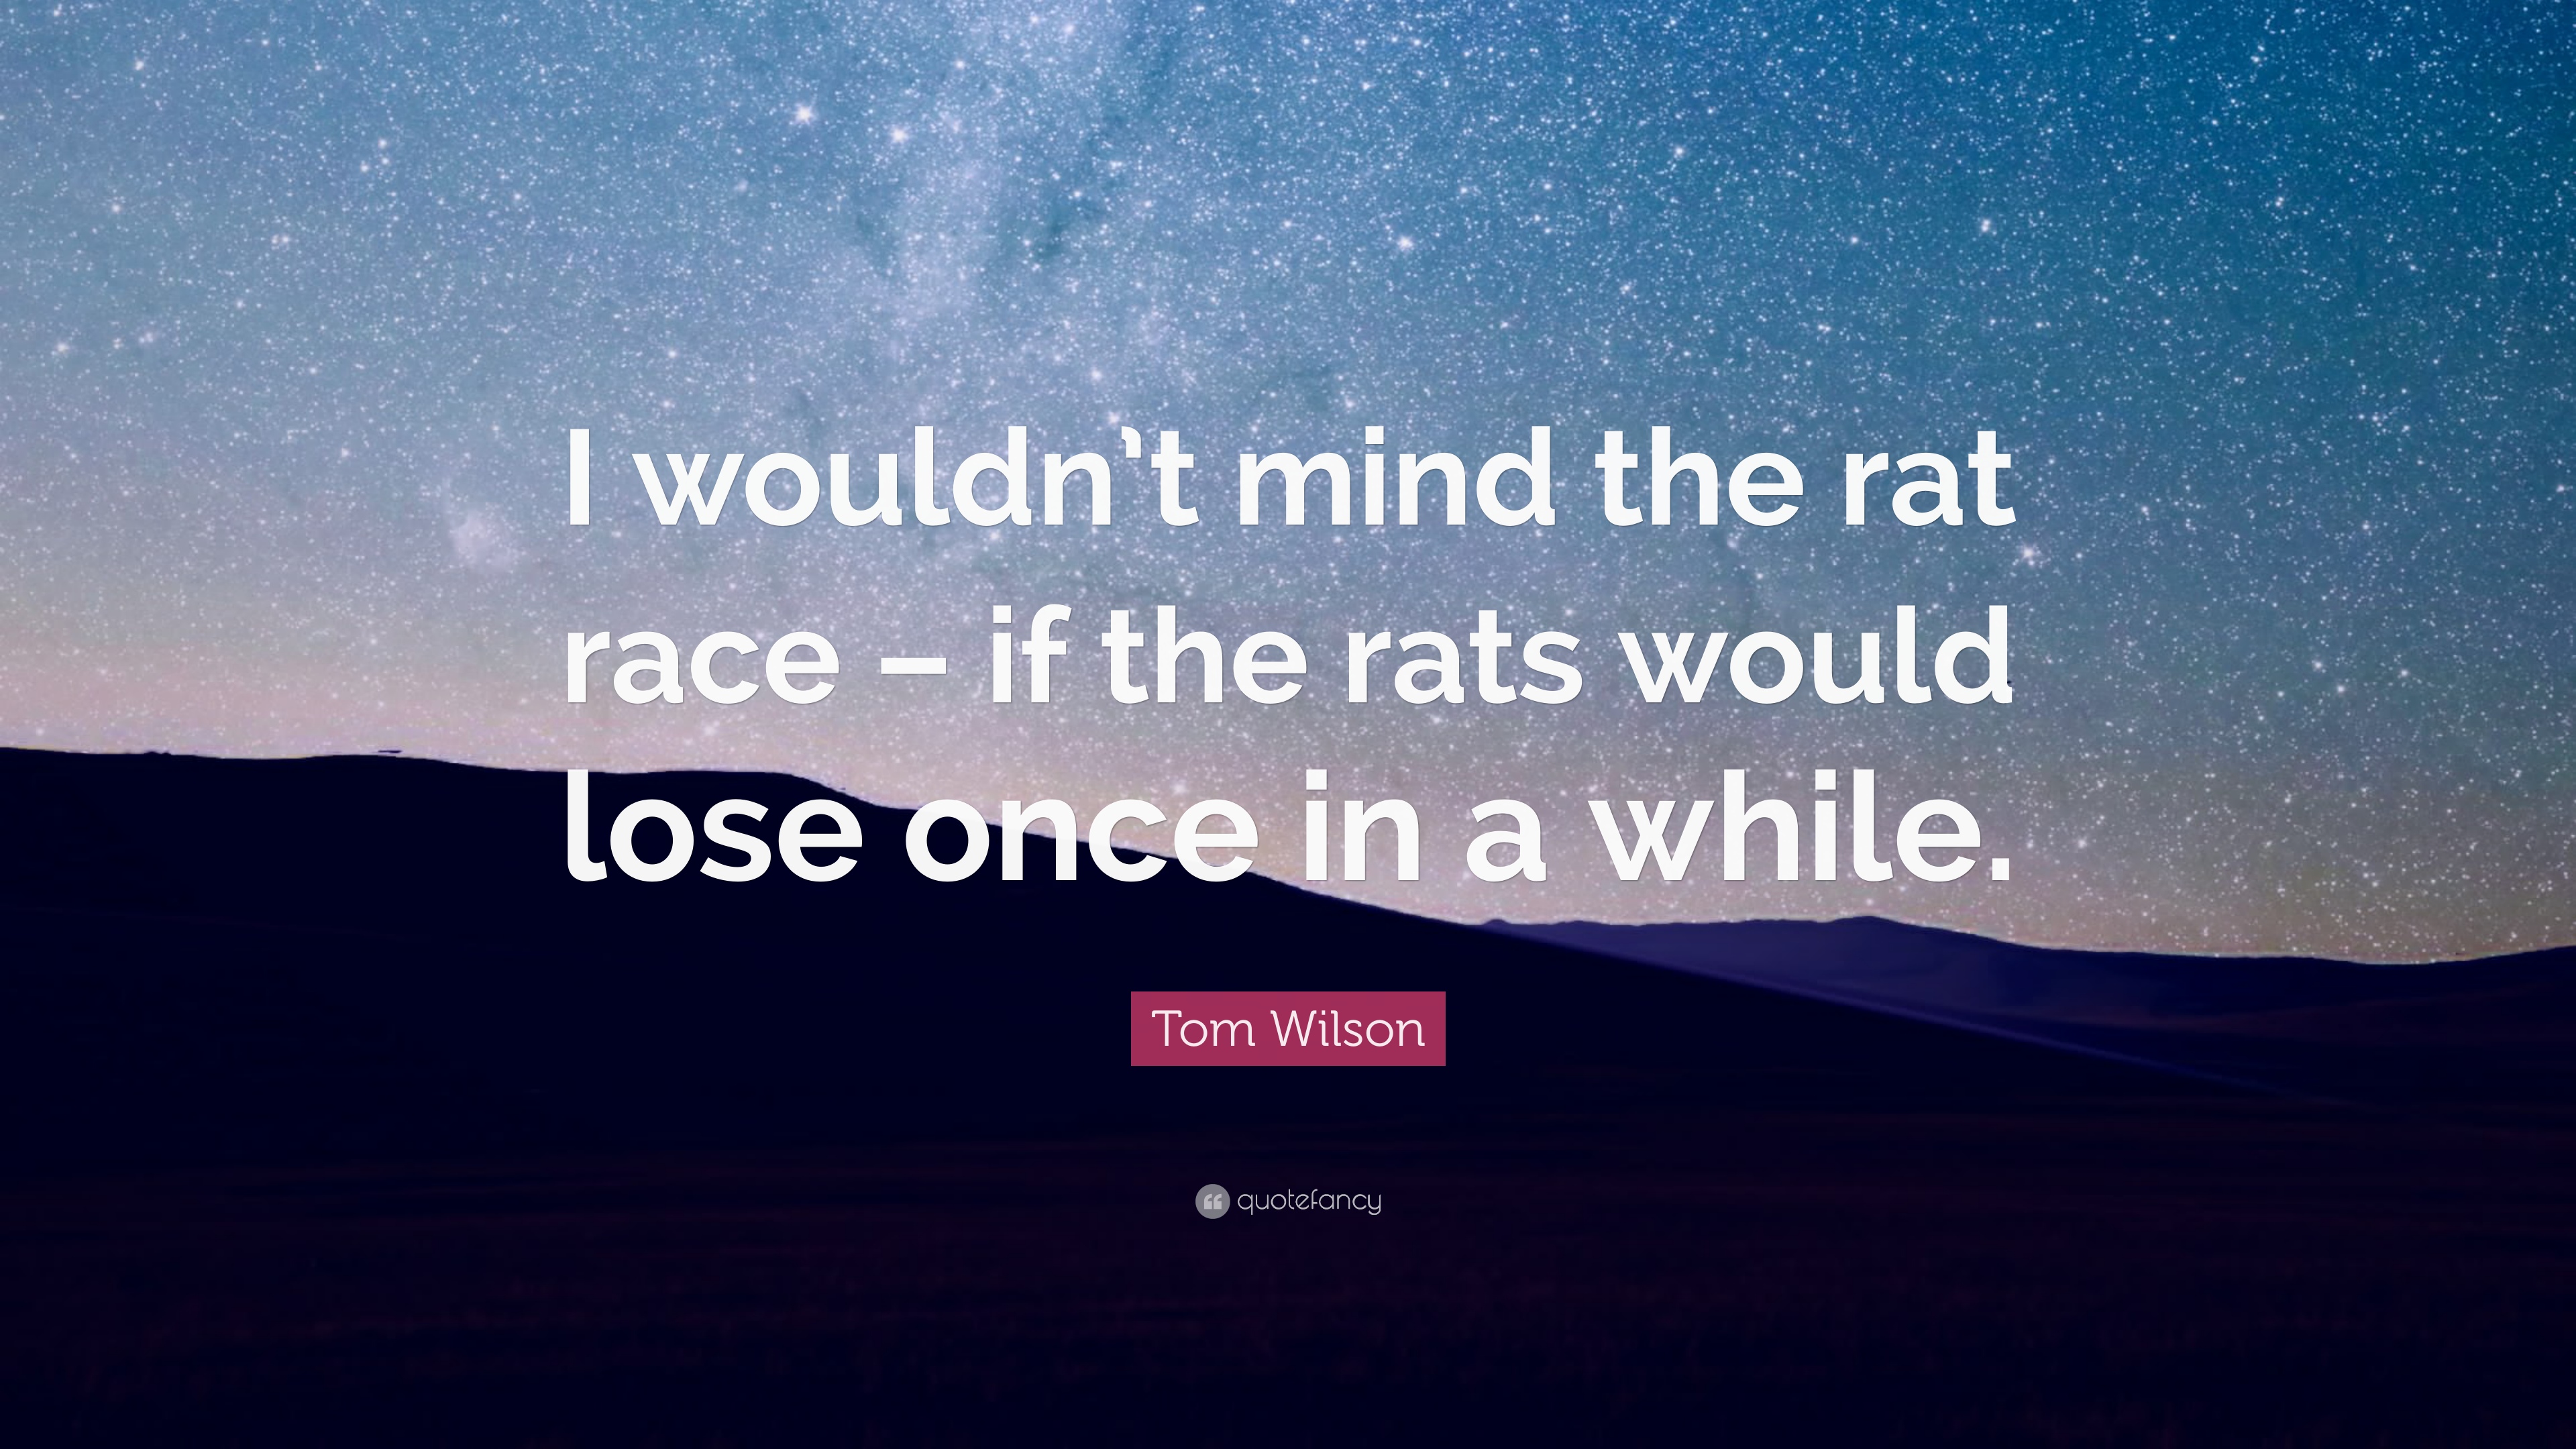 Tom Wilson Quote: “I wouldn't mind the rat race